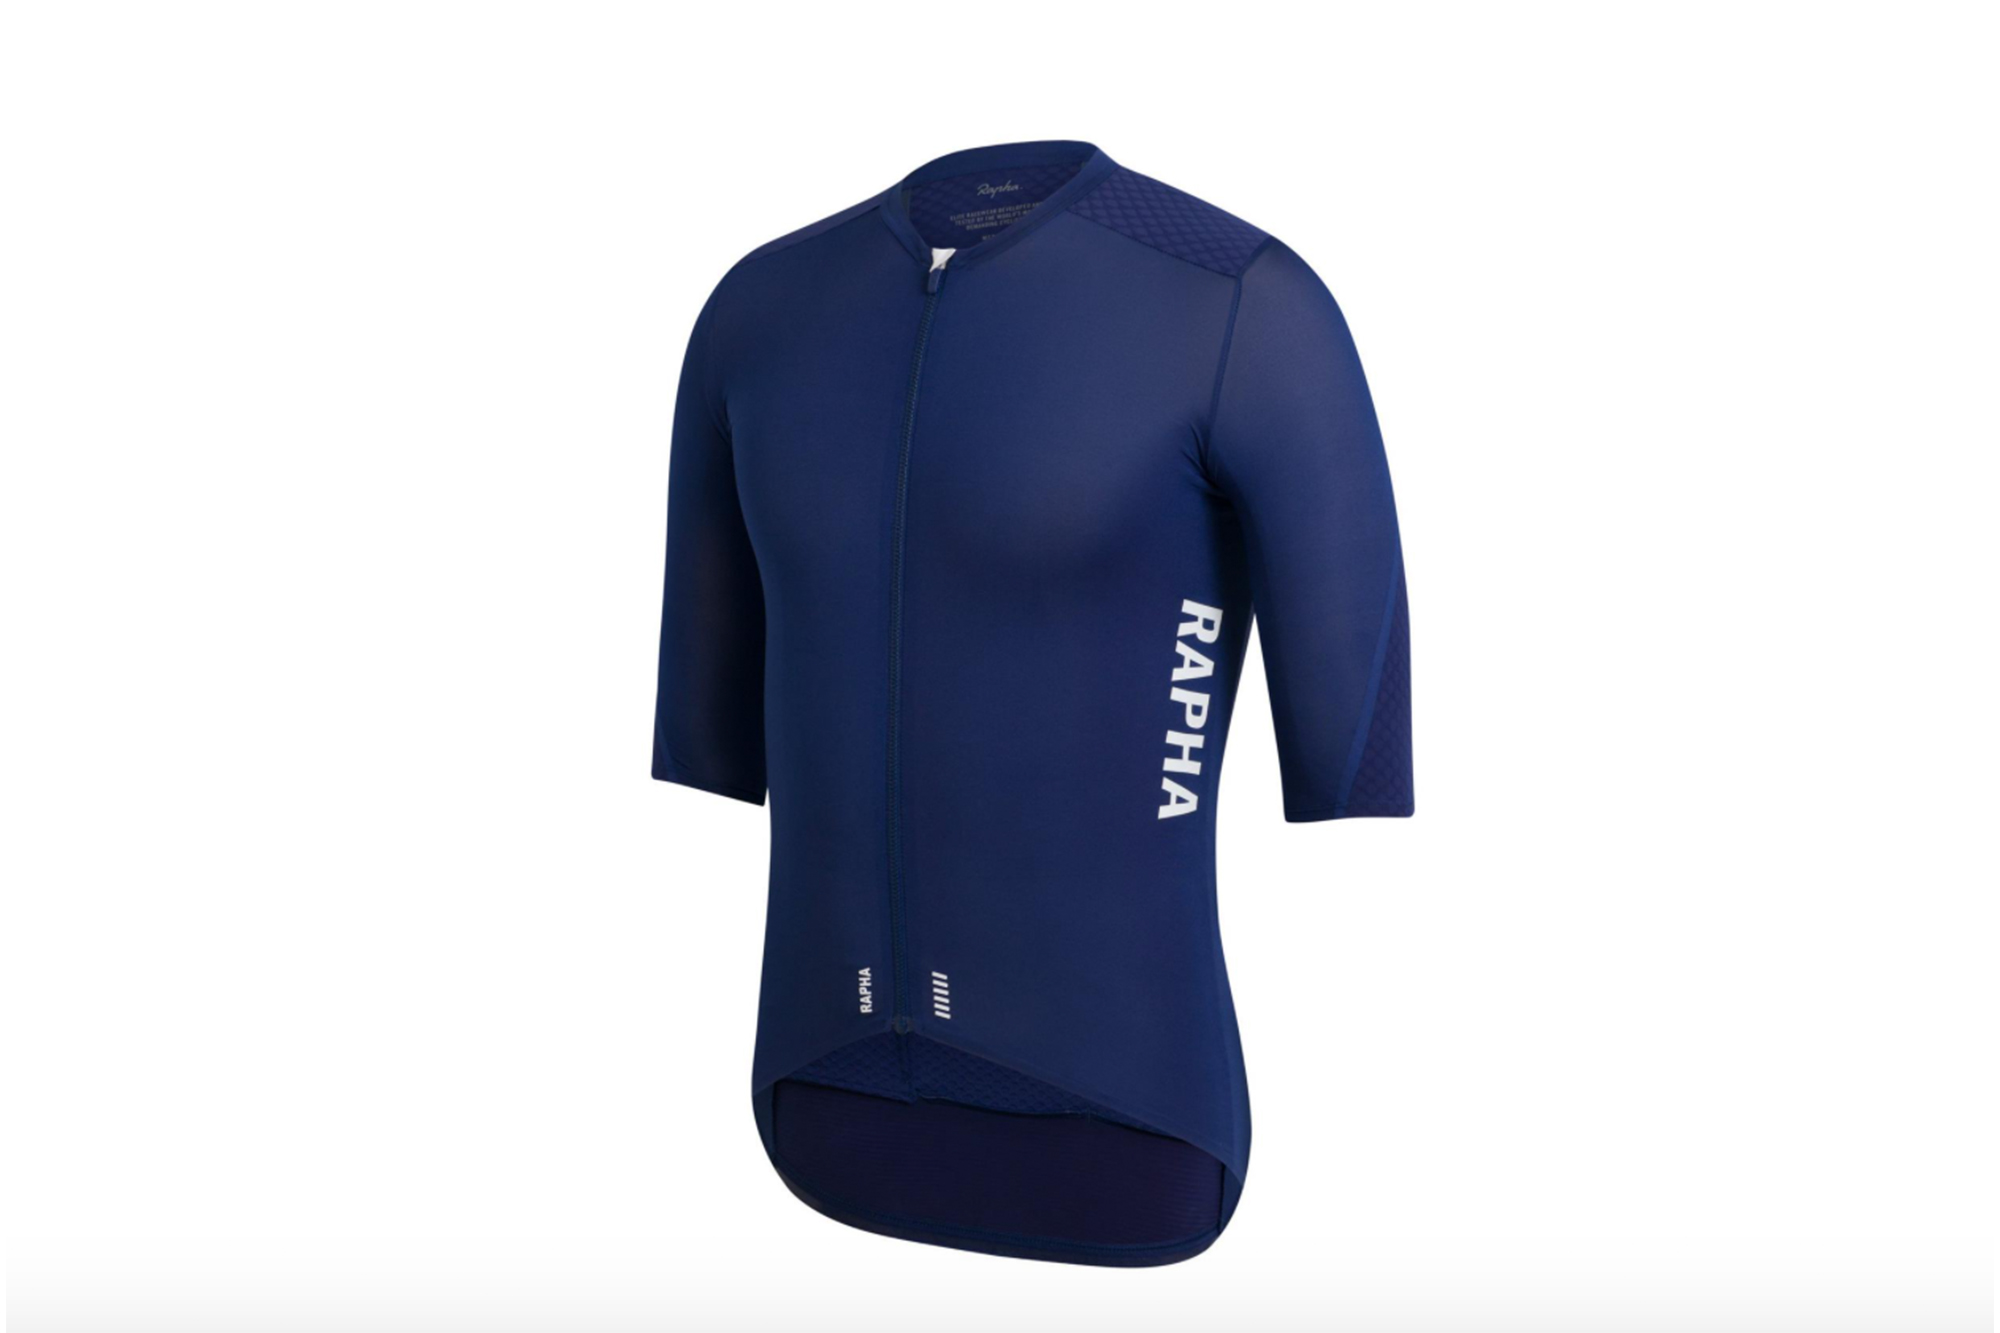 Rapha Pro Team Aero jersey review | Cycling Weekly